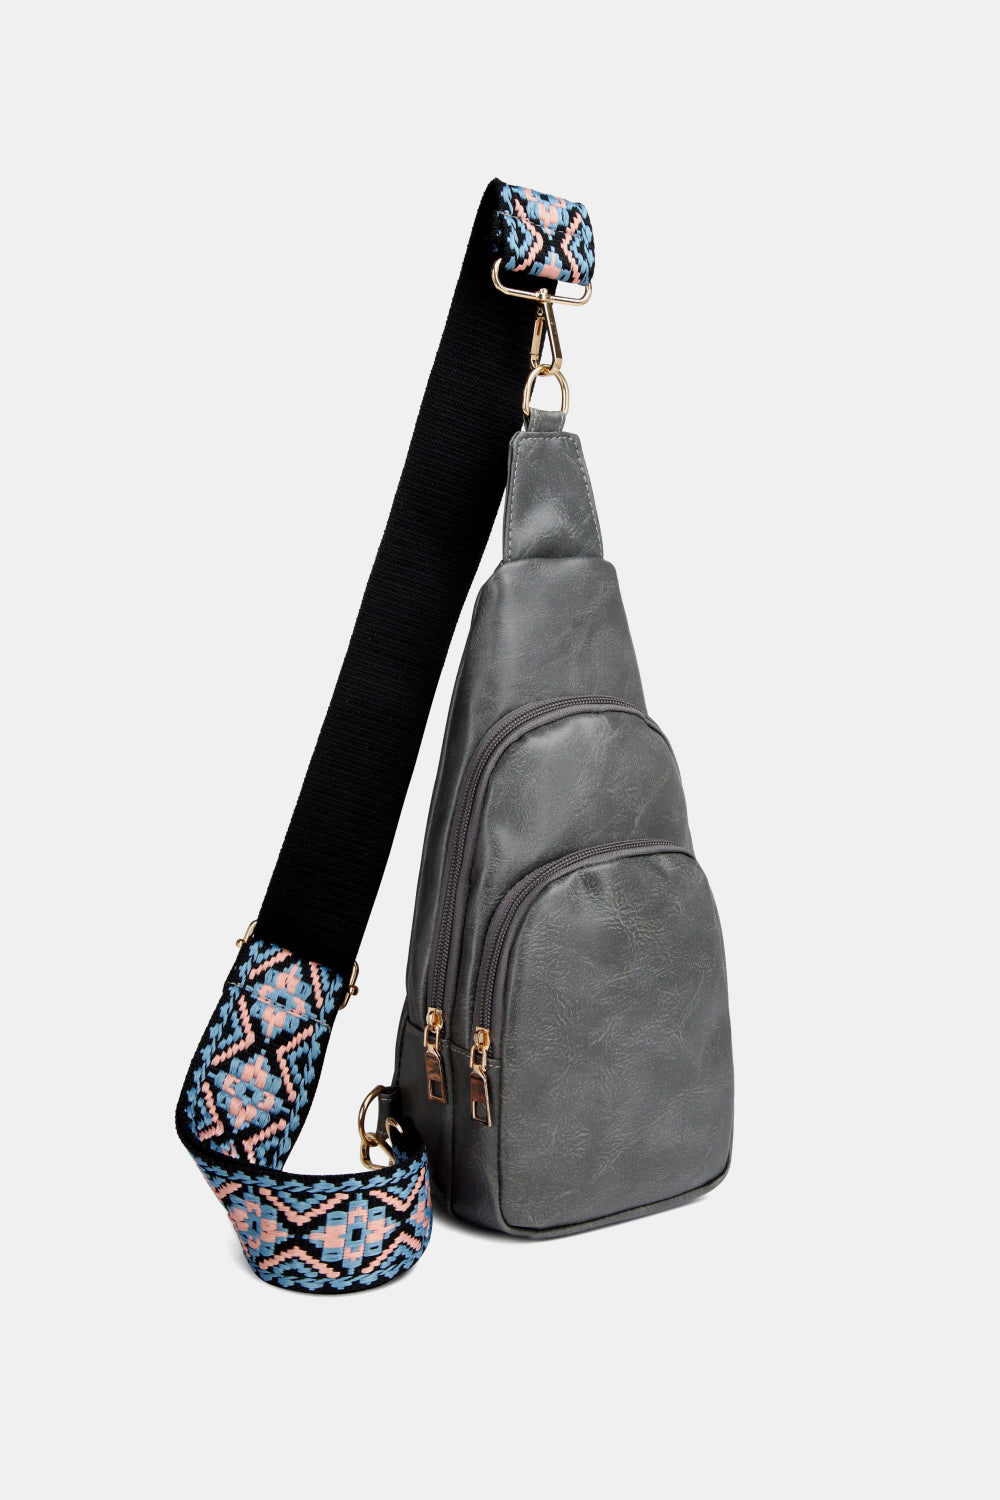 Get trendy with PU Leather Sling Bag - Bags available at Styles Code. Grab yours today!